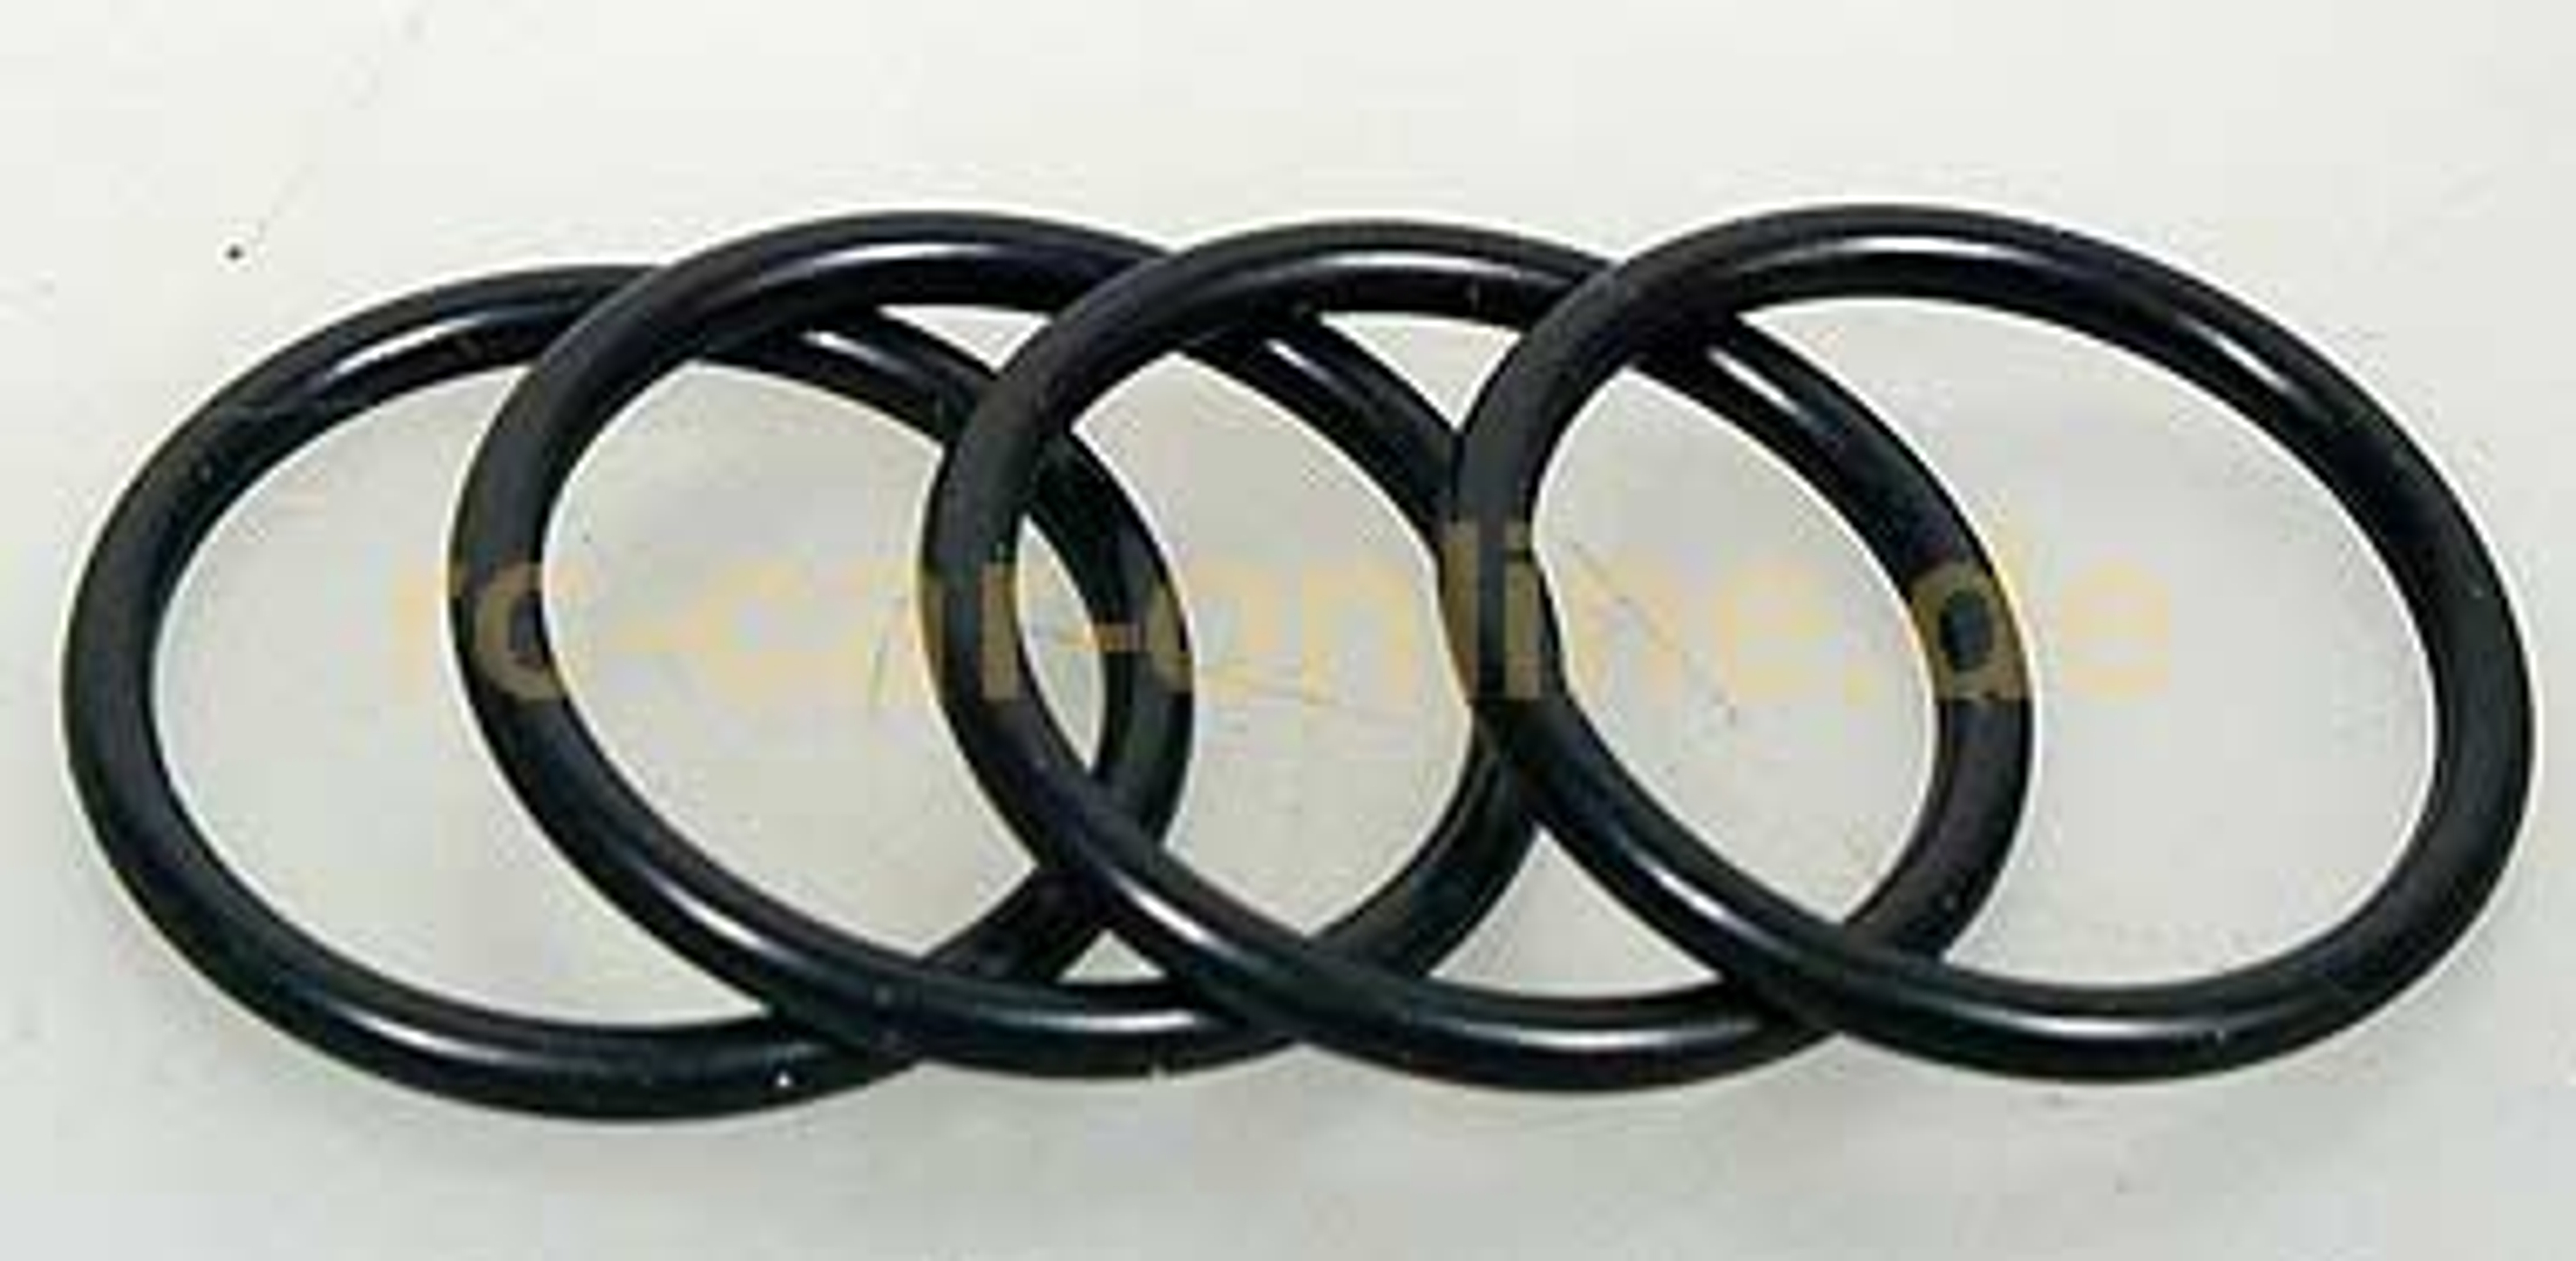 cad2017, O-rings for adjustment nut, thick, 4 pcs.